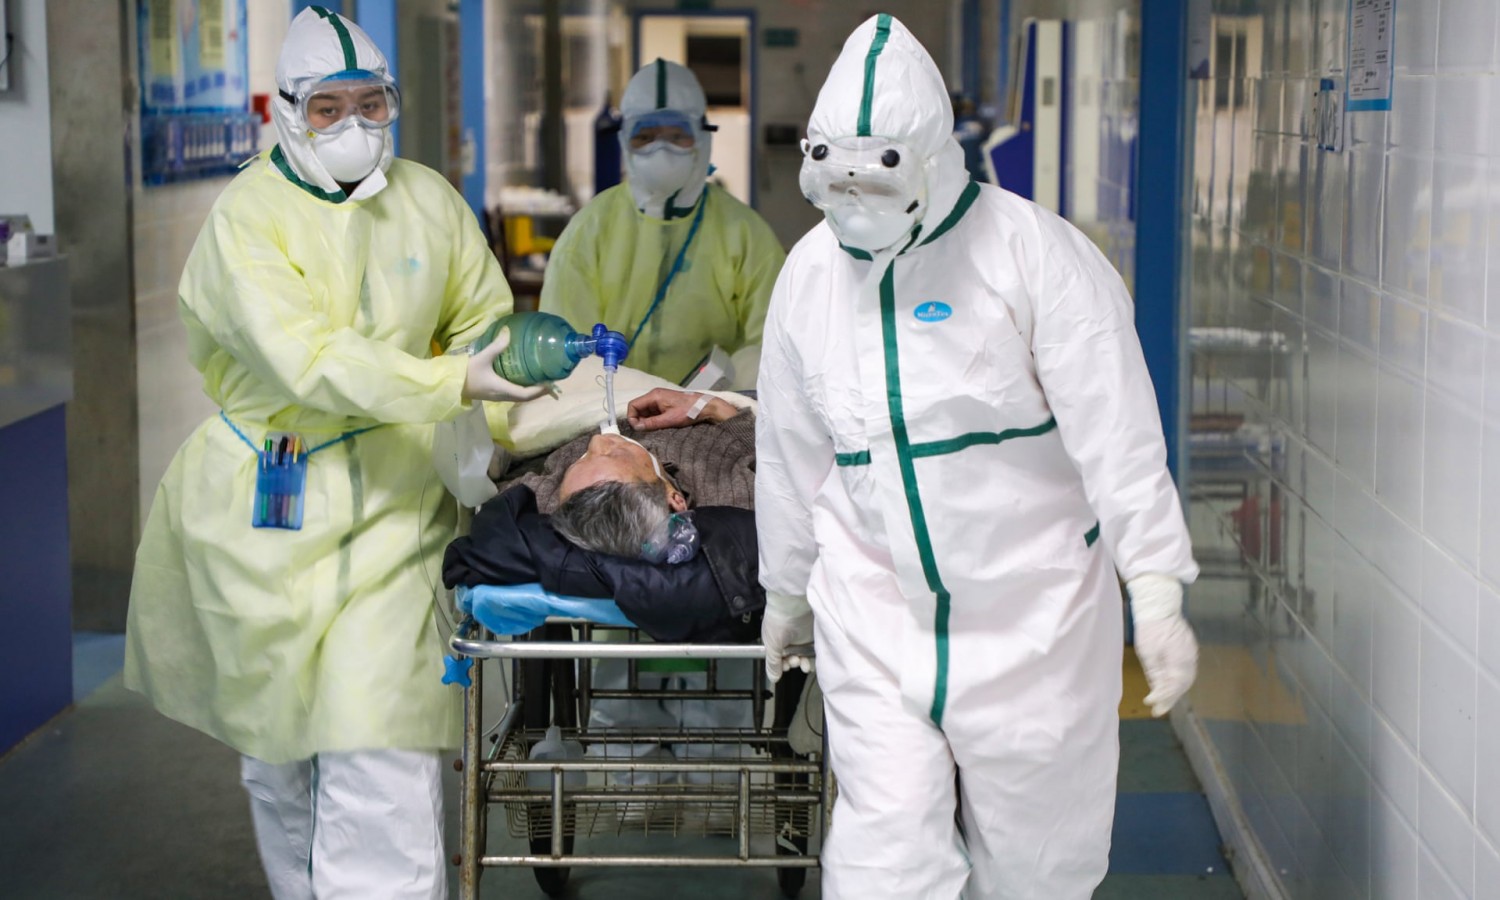 US citizen, 60, died of virus, while Japan says citizen who died had symptoms of virus